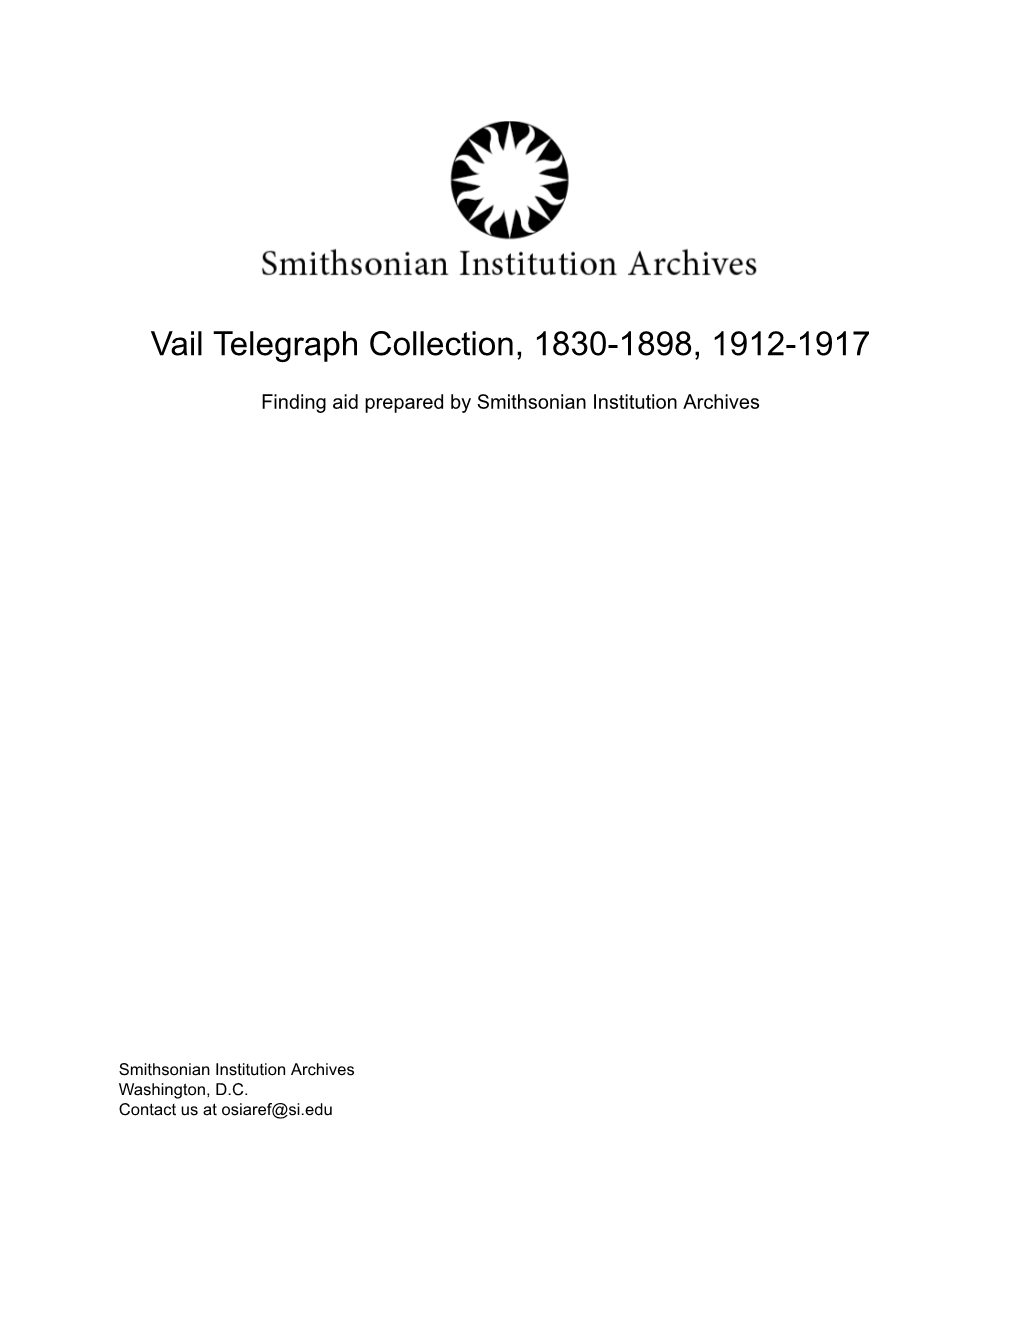 Vail Telegraph Collection, 1830-1898, 1912-1917